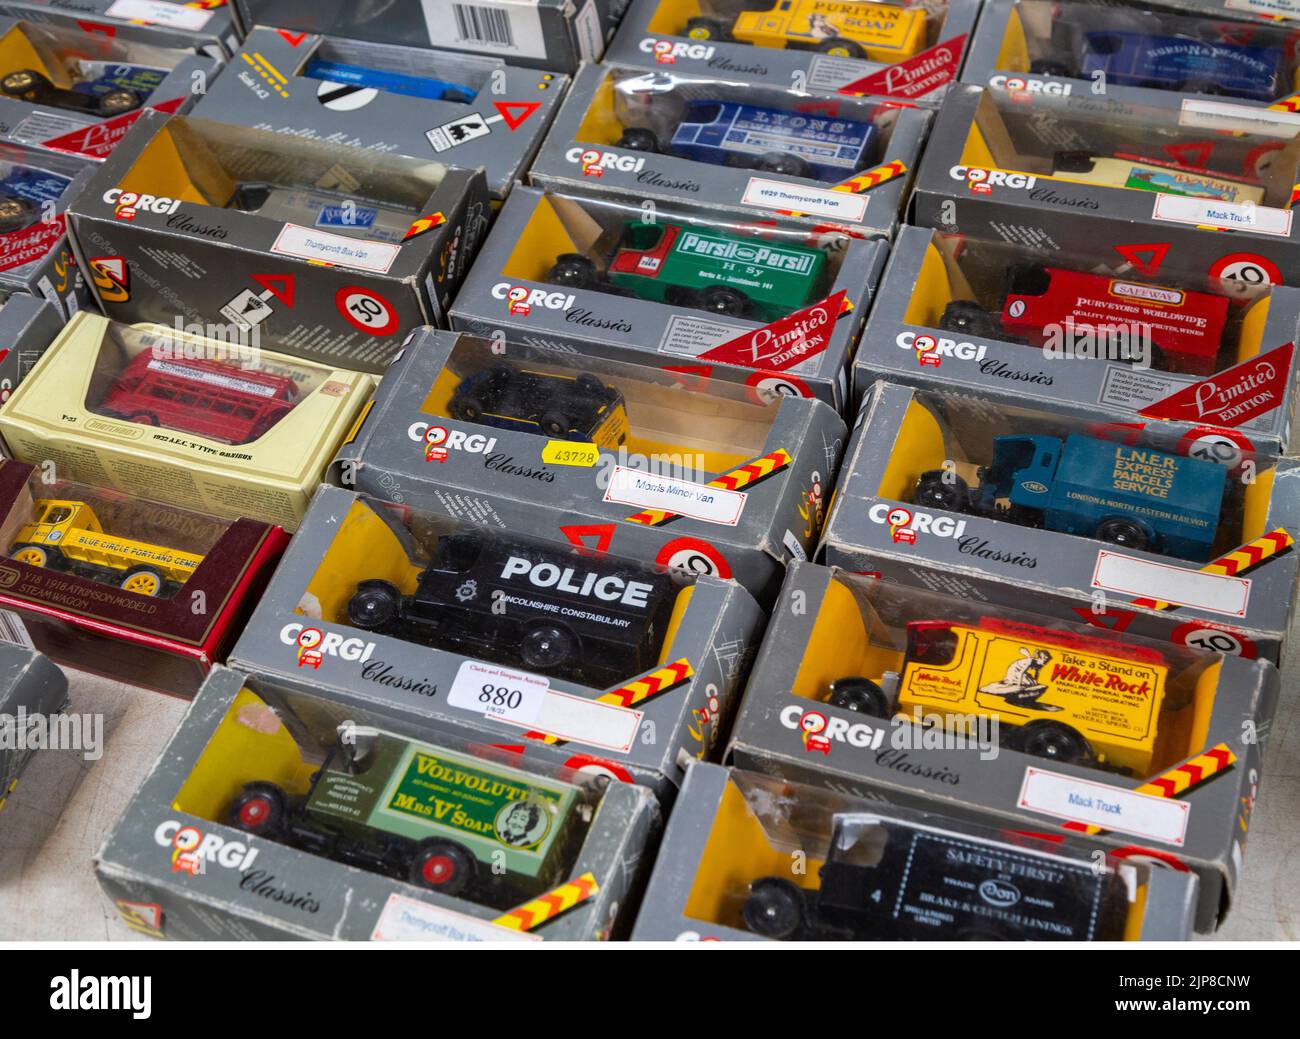 A selection of boxed Corgi model vehicles on display in auction room, UK Stock Photo